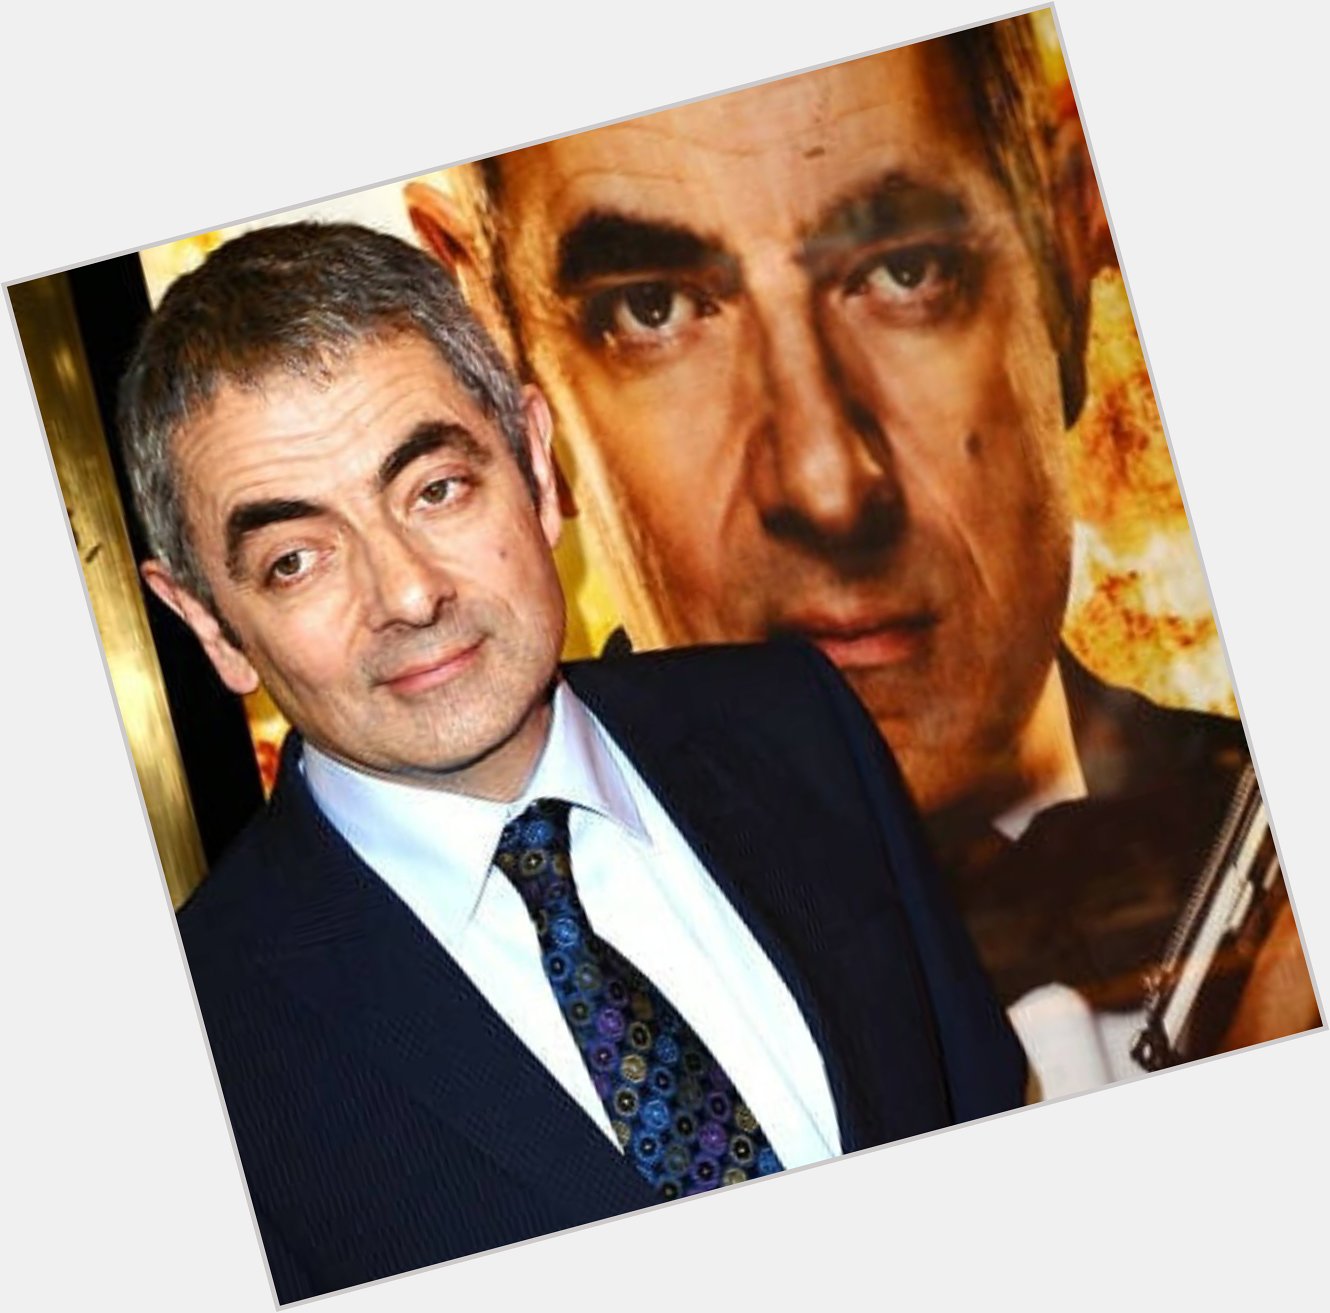   HAPPY BIRTHDAY ROWAN ATKINSON (MR.BEAN)  The man who made us laugh without uttering a single word 